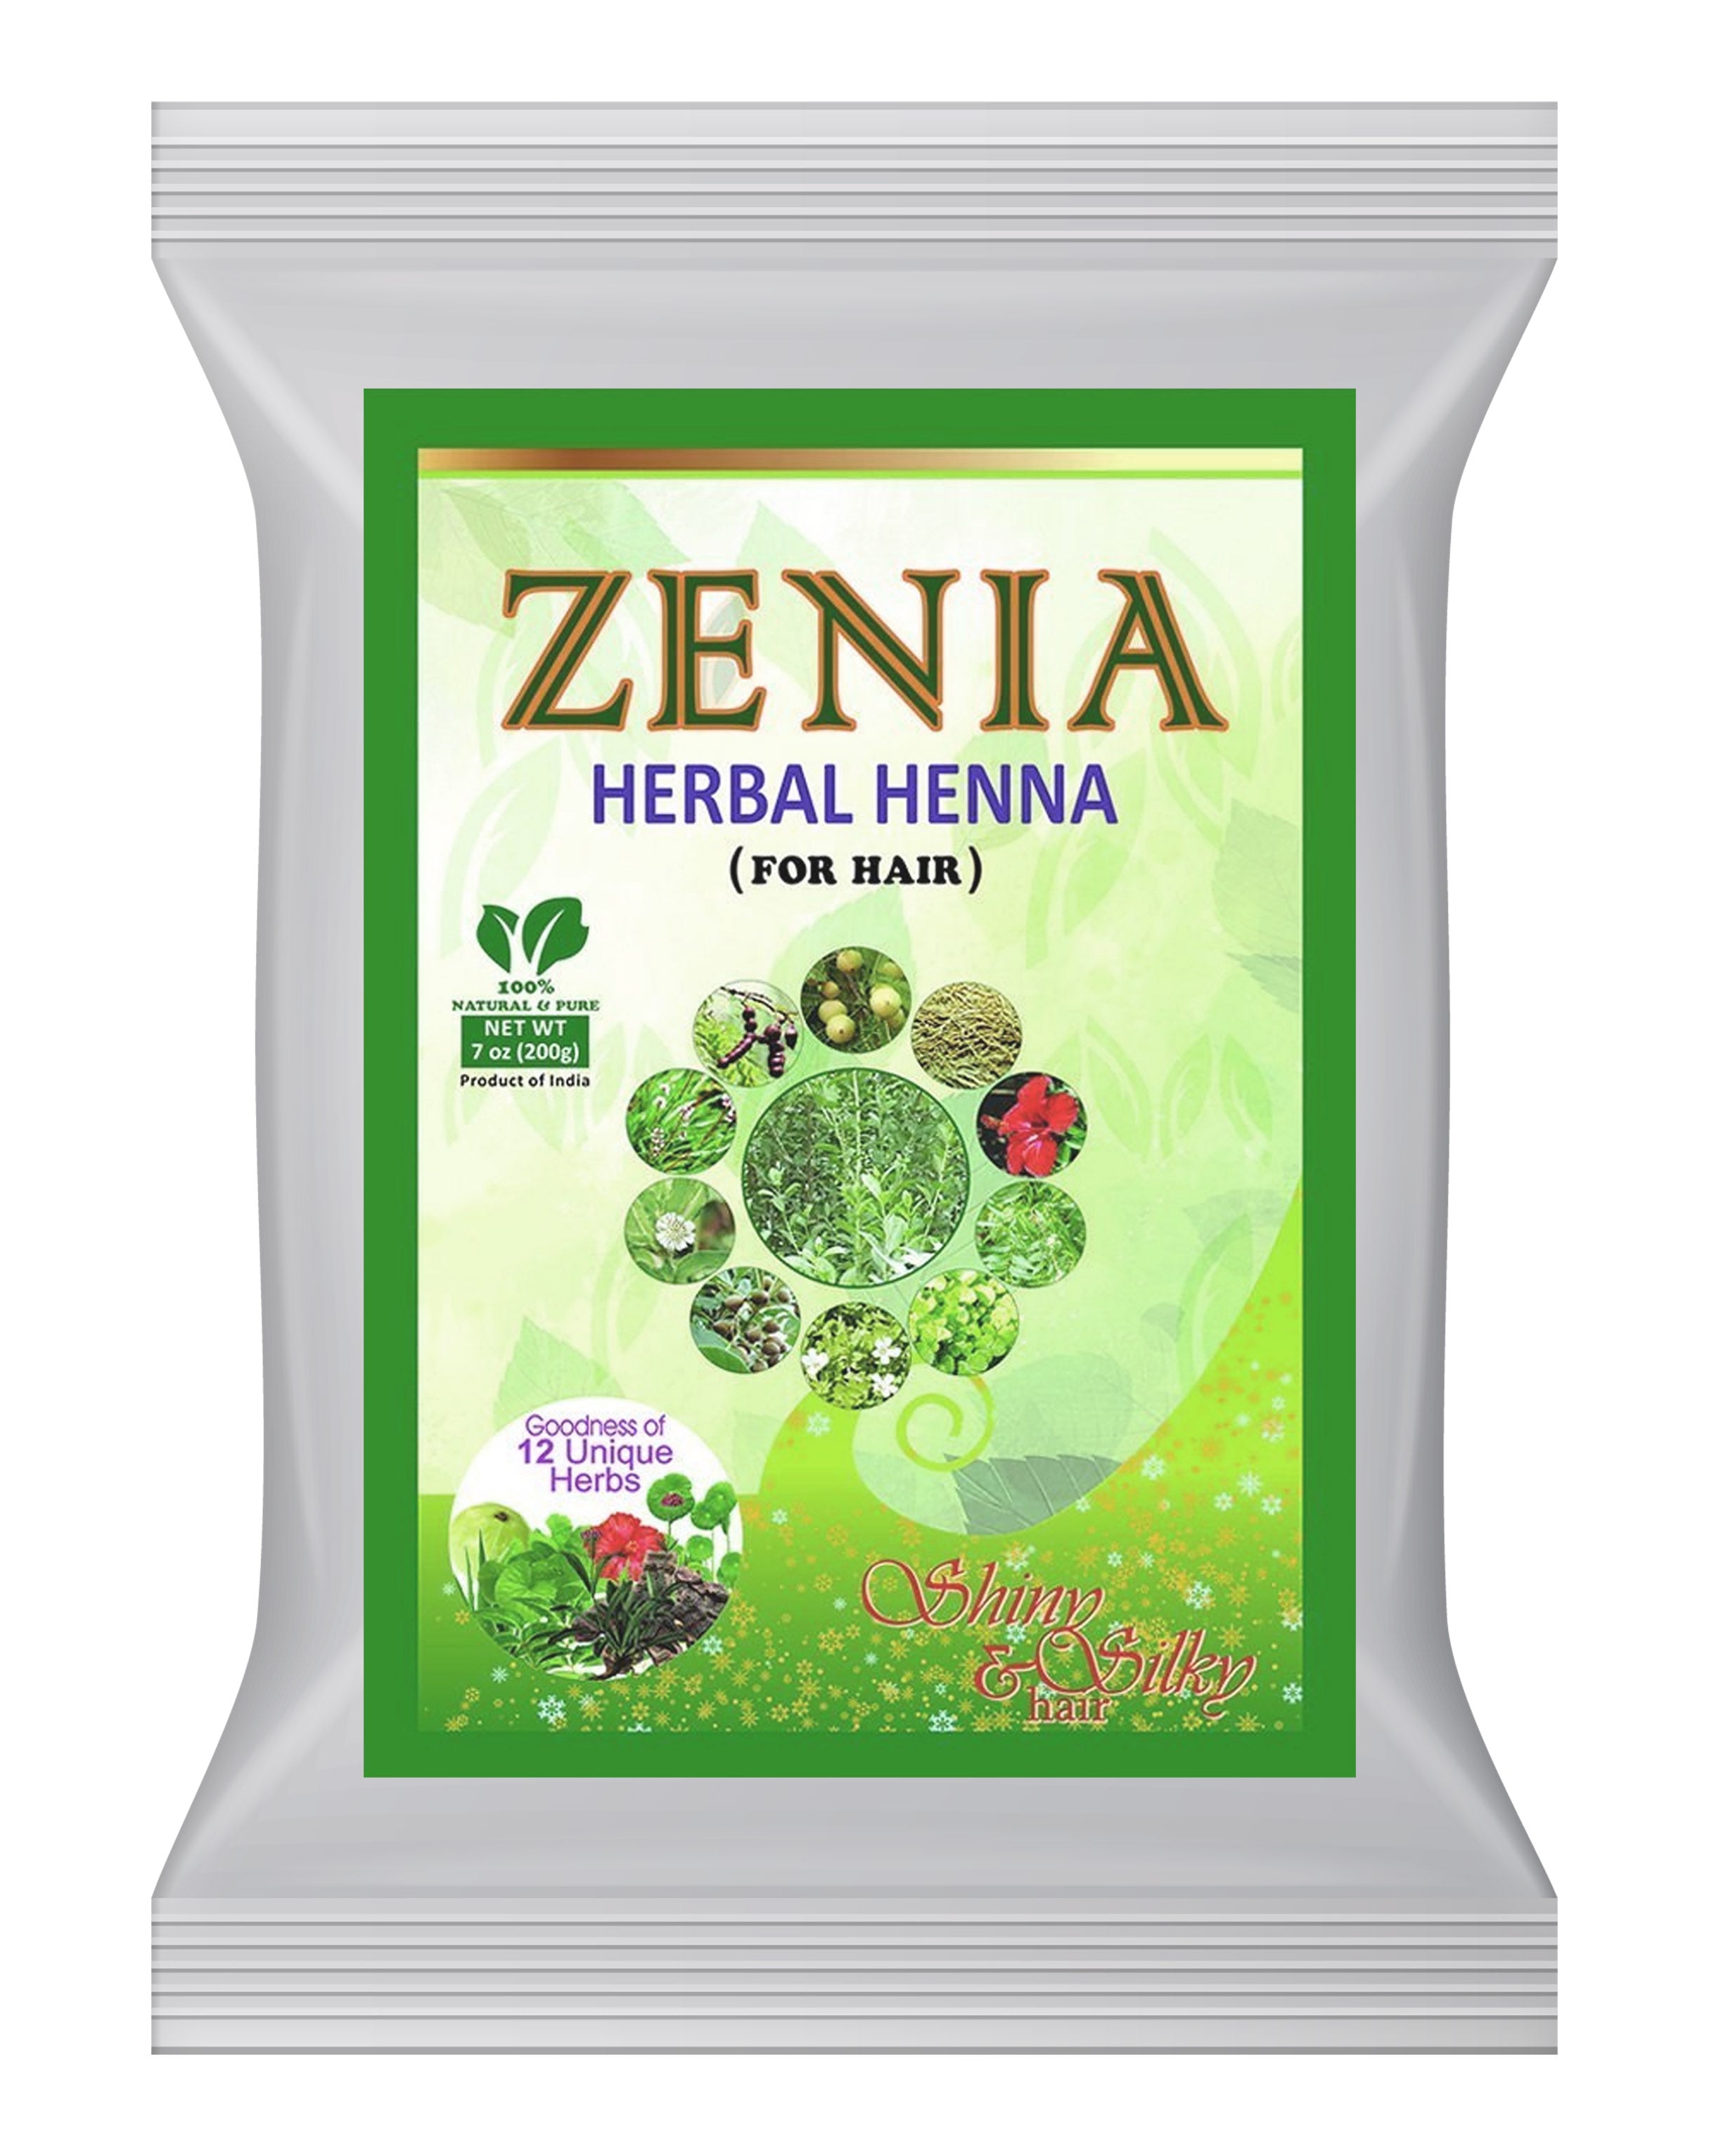 Zenia Herbal Henna Powder Natural Mehndi for Hair Color/Dye | With Goodness of 10+ Herbs